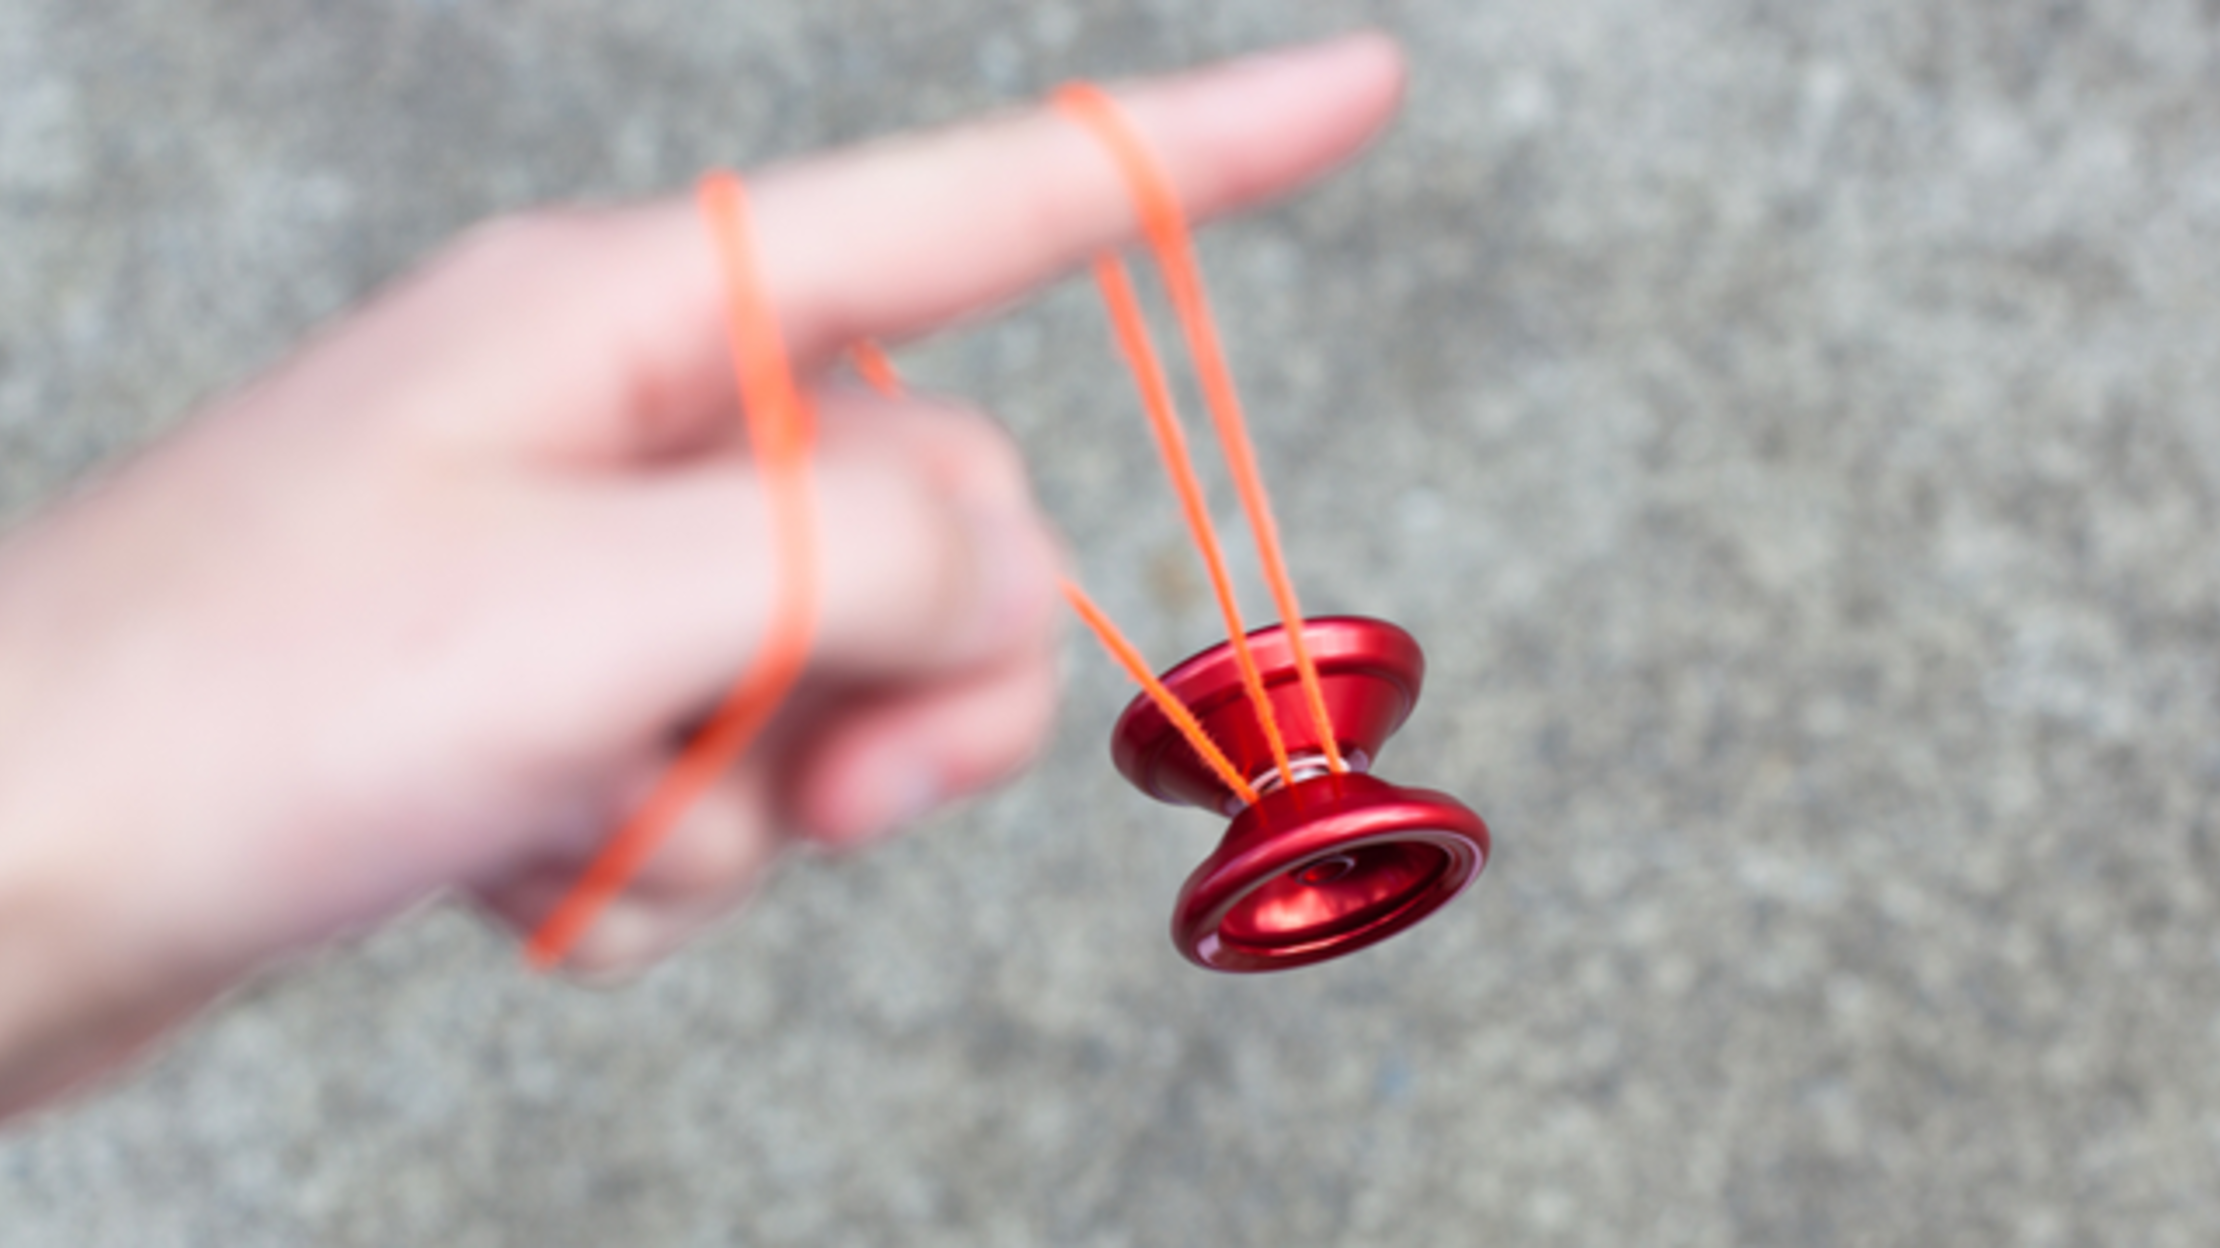 The World YoYo Contest is Live Streaming Through Saturday Mental Floss